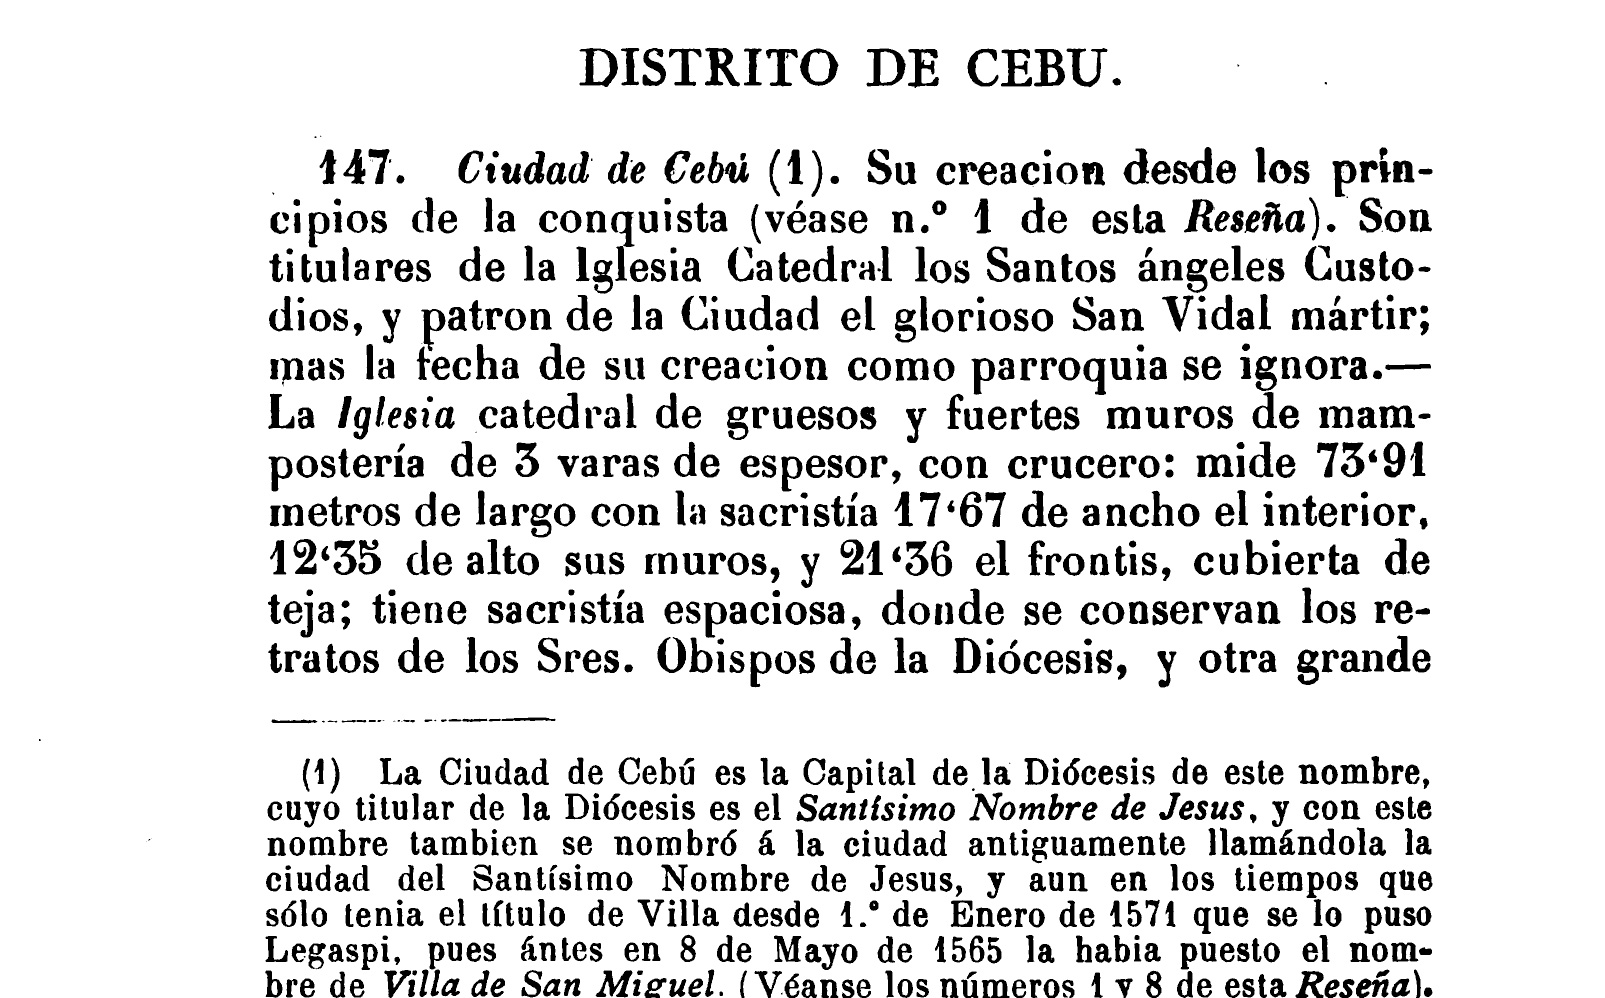 Breve Reseña published in 1886 by Felipe Redondo describes the cathedral as having the Guardian Angels as titular patron, with the “glorious martyr” San Vidal as patron saint of the city.